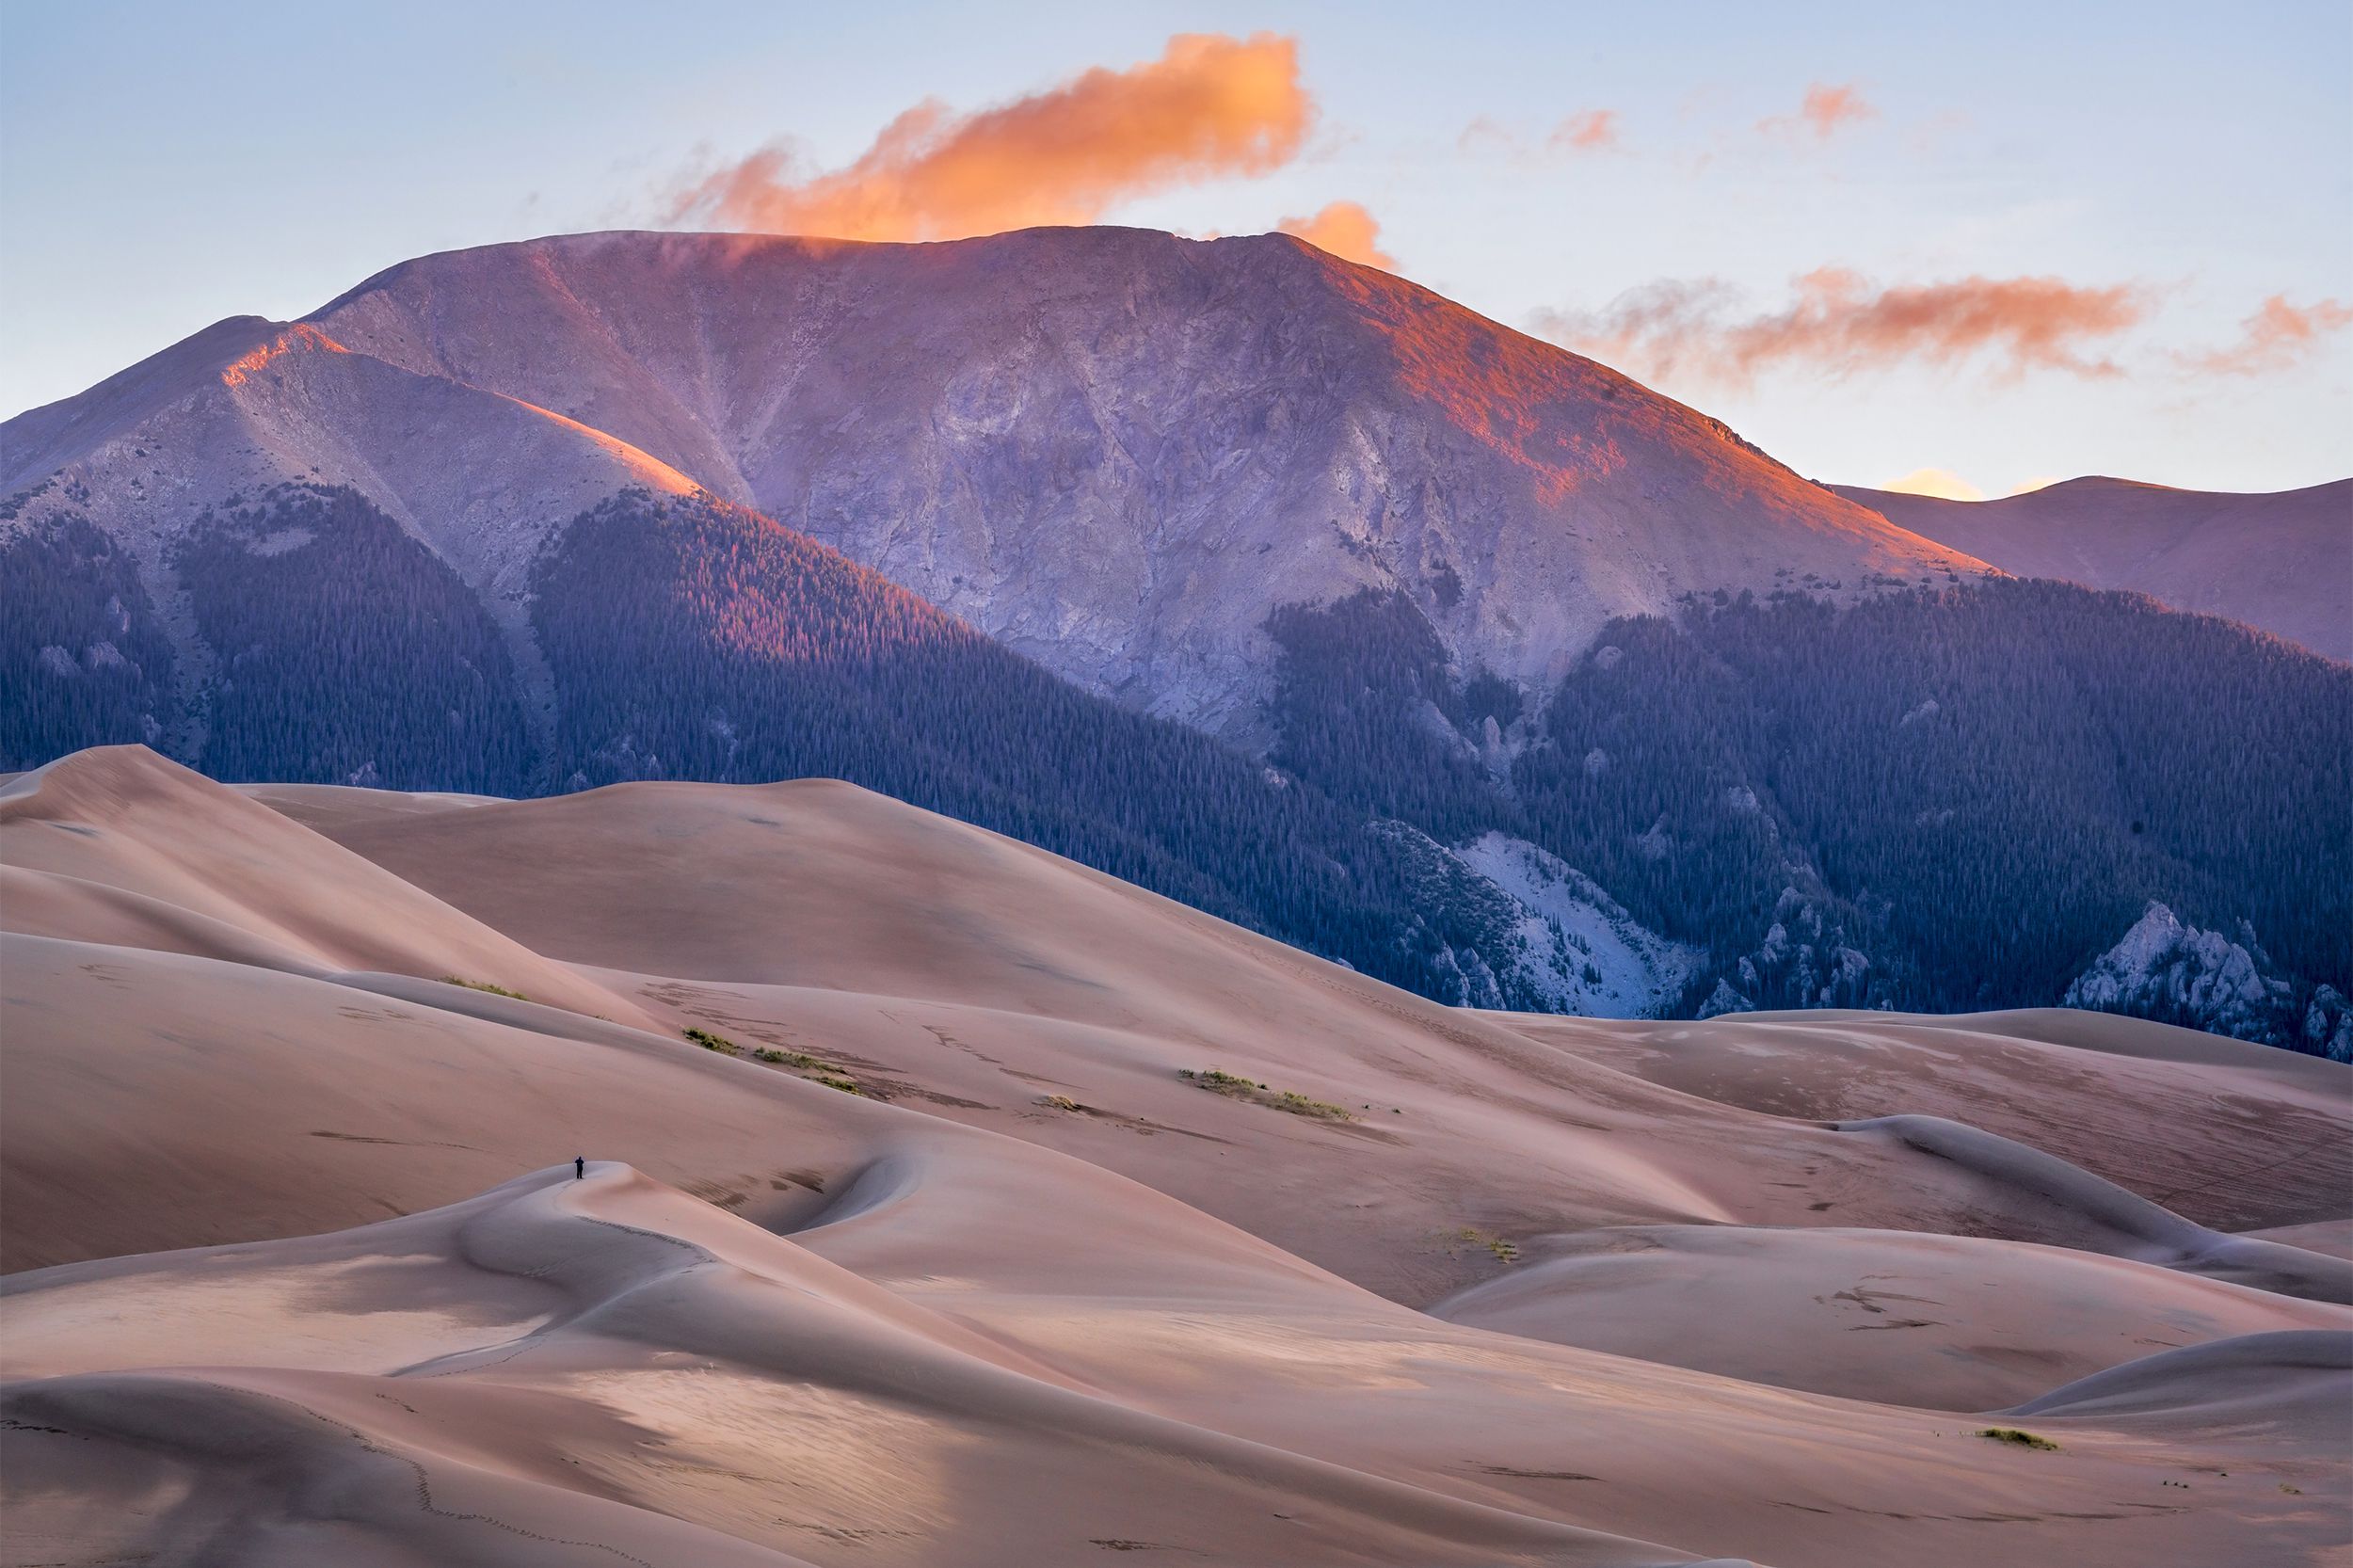 Spread over 30 square miles in southern Colorado, <a href="https://www.nps.gov/grsa/index.htm">Great Sand Dunes National Park</a> has the unique claim of being home to the tallest sand dune in North America, which is 750-feet high and takes five hours to hike round-trip. This diverse park also contains grasslands, wetlands, conifer and aspen forests, alpine lakes, and even tundra.